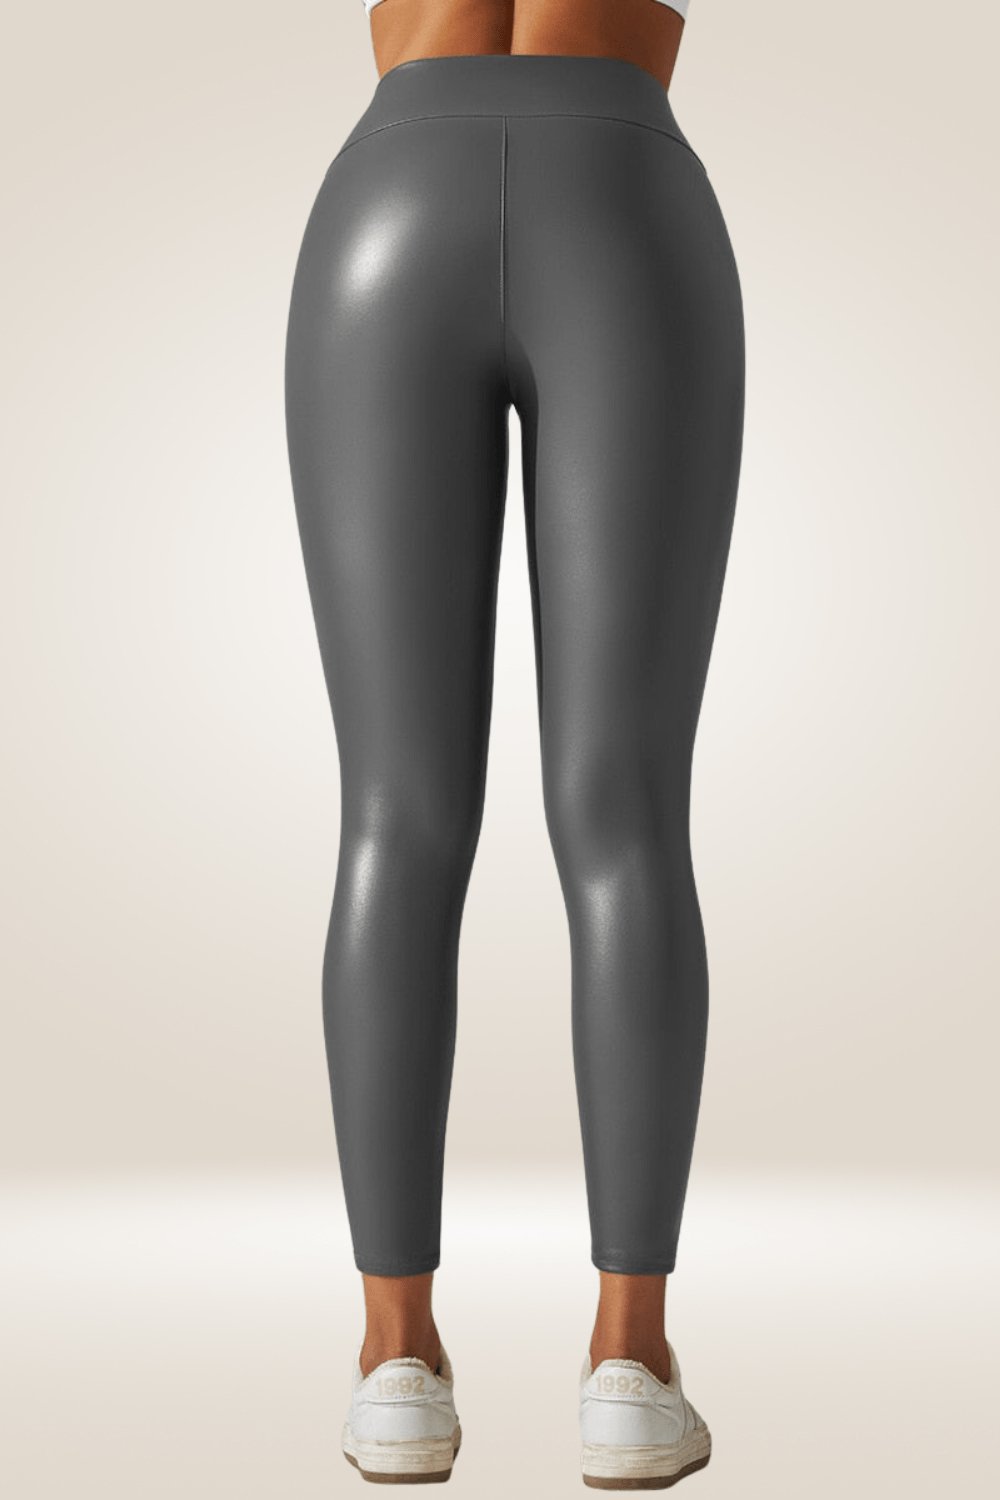 Gray High Waisted Faux Leather Leggings - TGC Boutique - Leggings